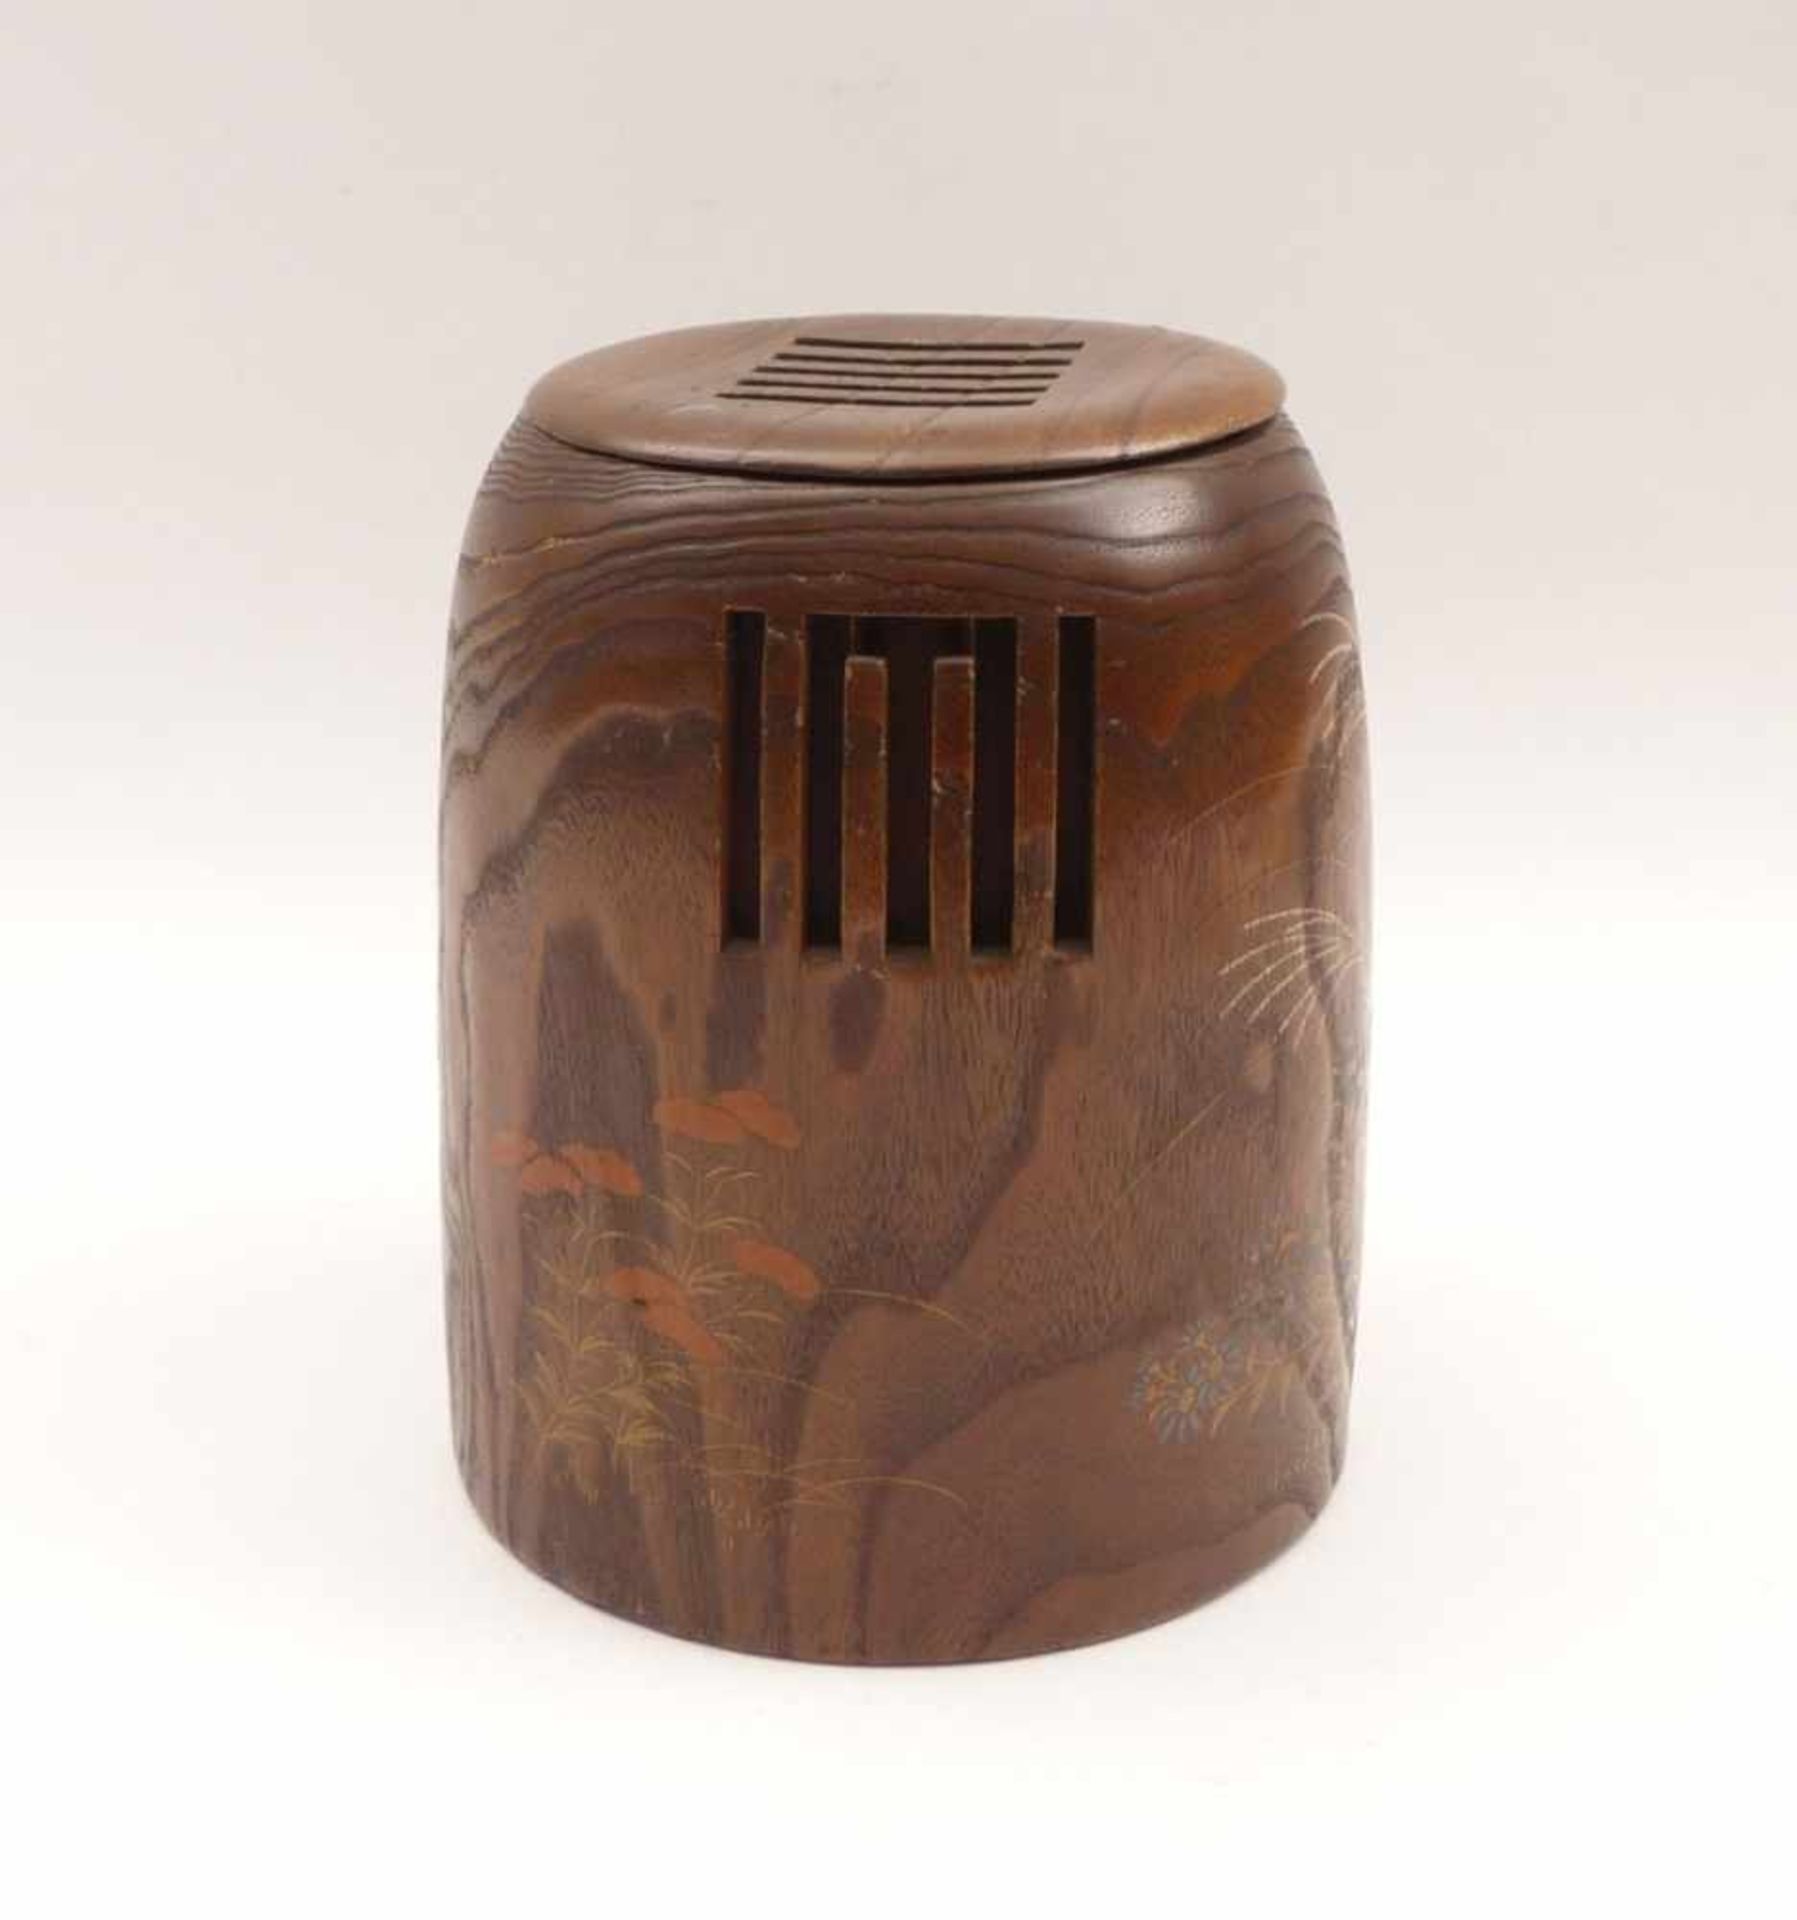 Covered holder for incense sticksJapan, Meiji PeriodWood (bamboo?), colored lacquer paint, copper - Image 2 of 3